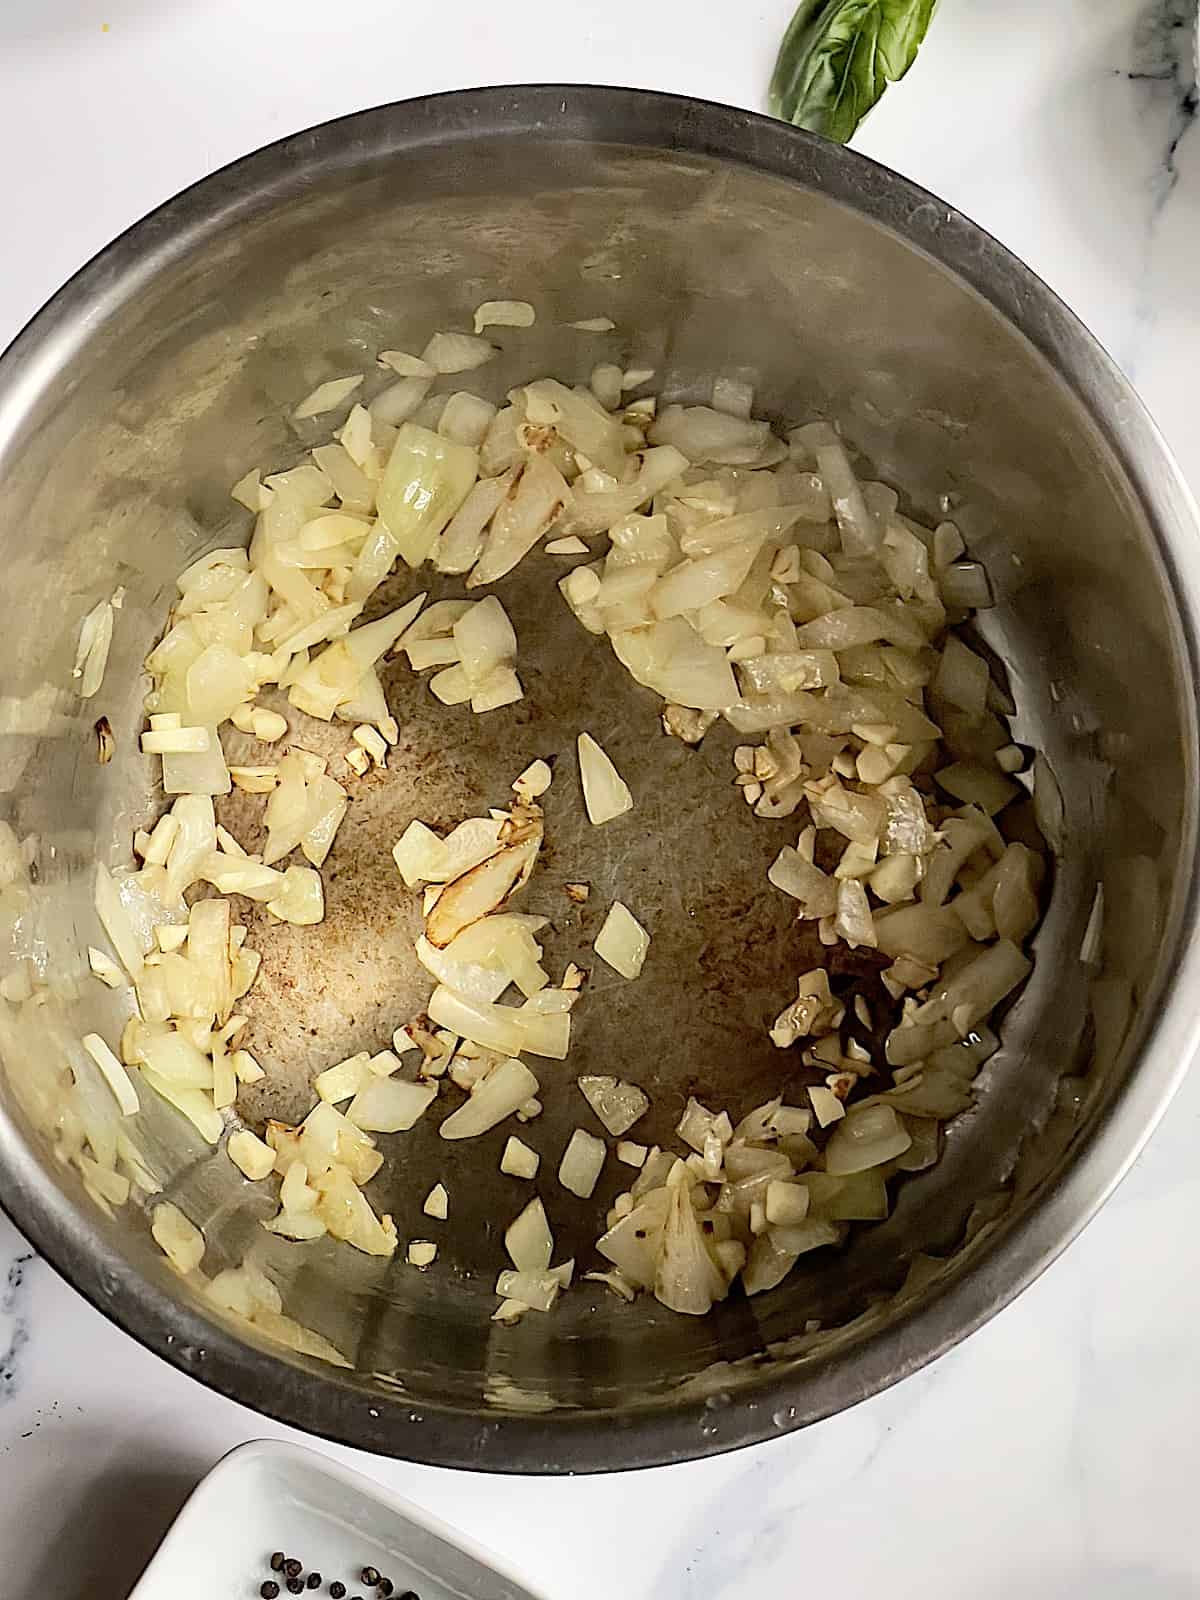 onions and garlic in an inner pot